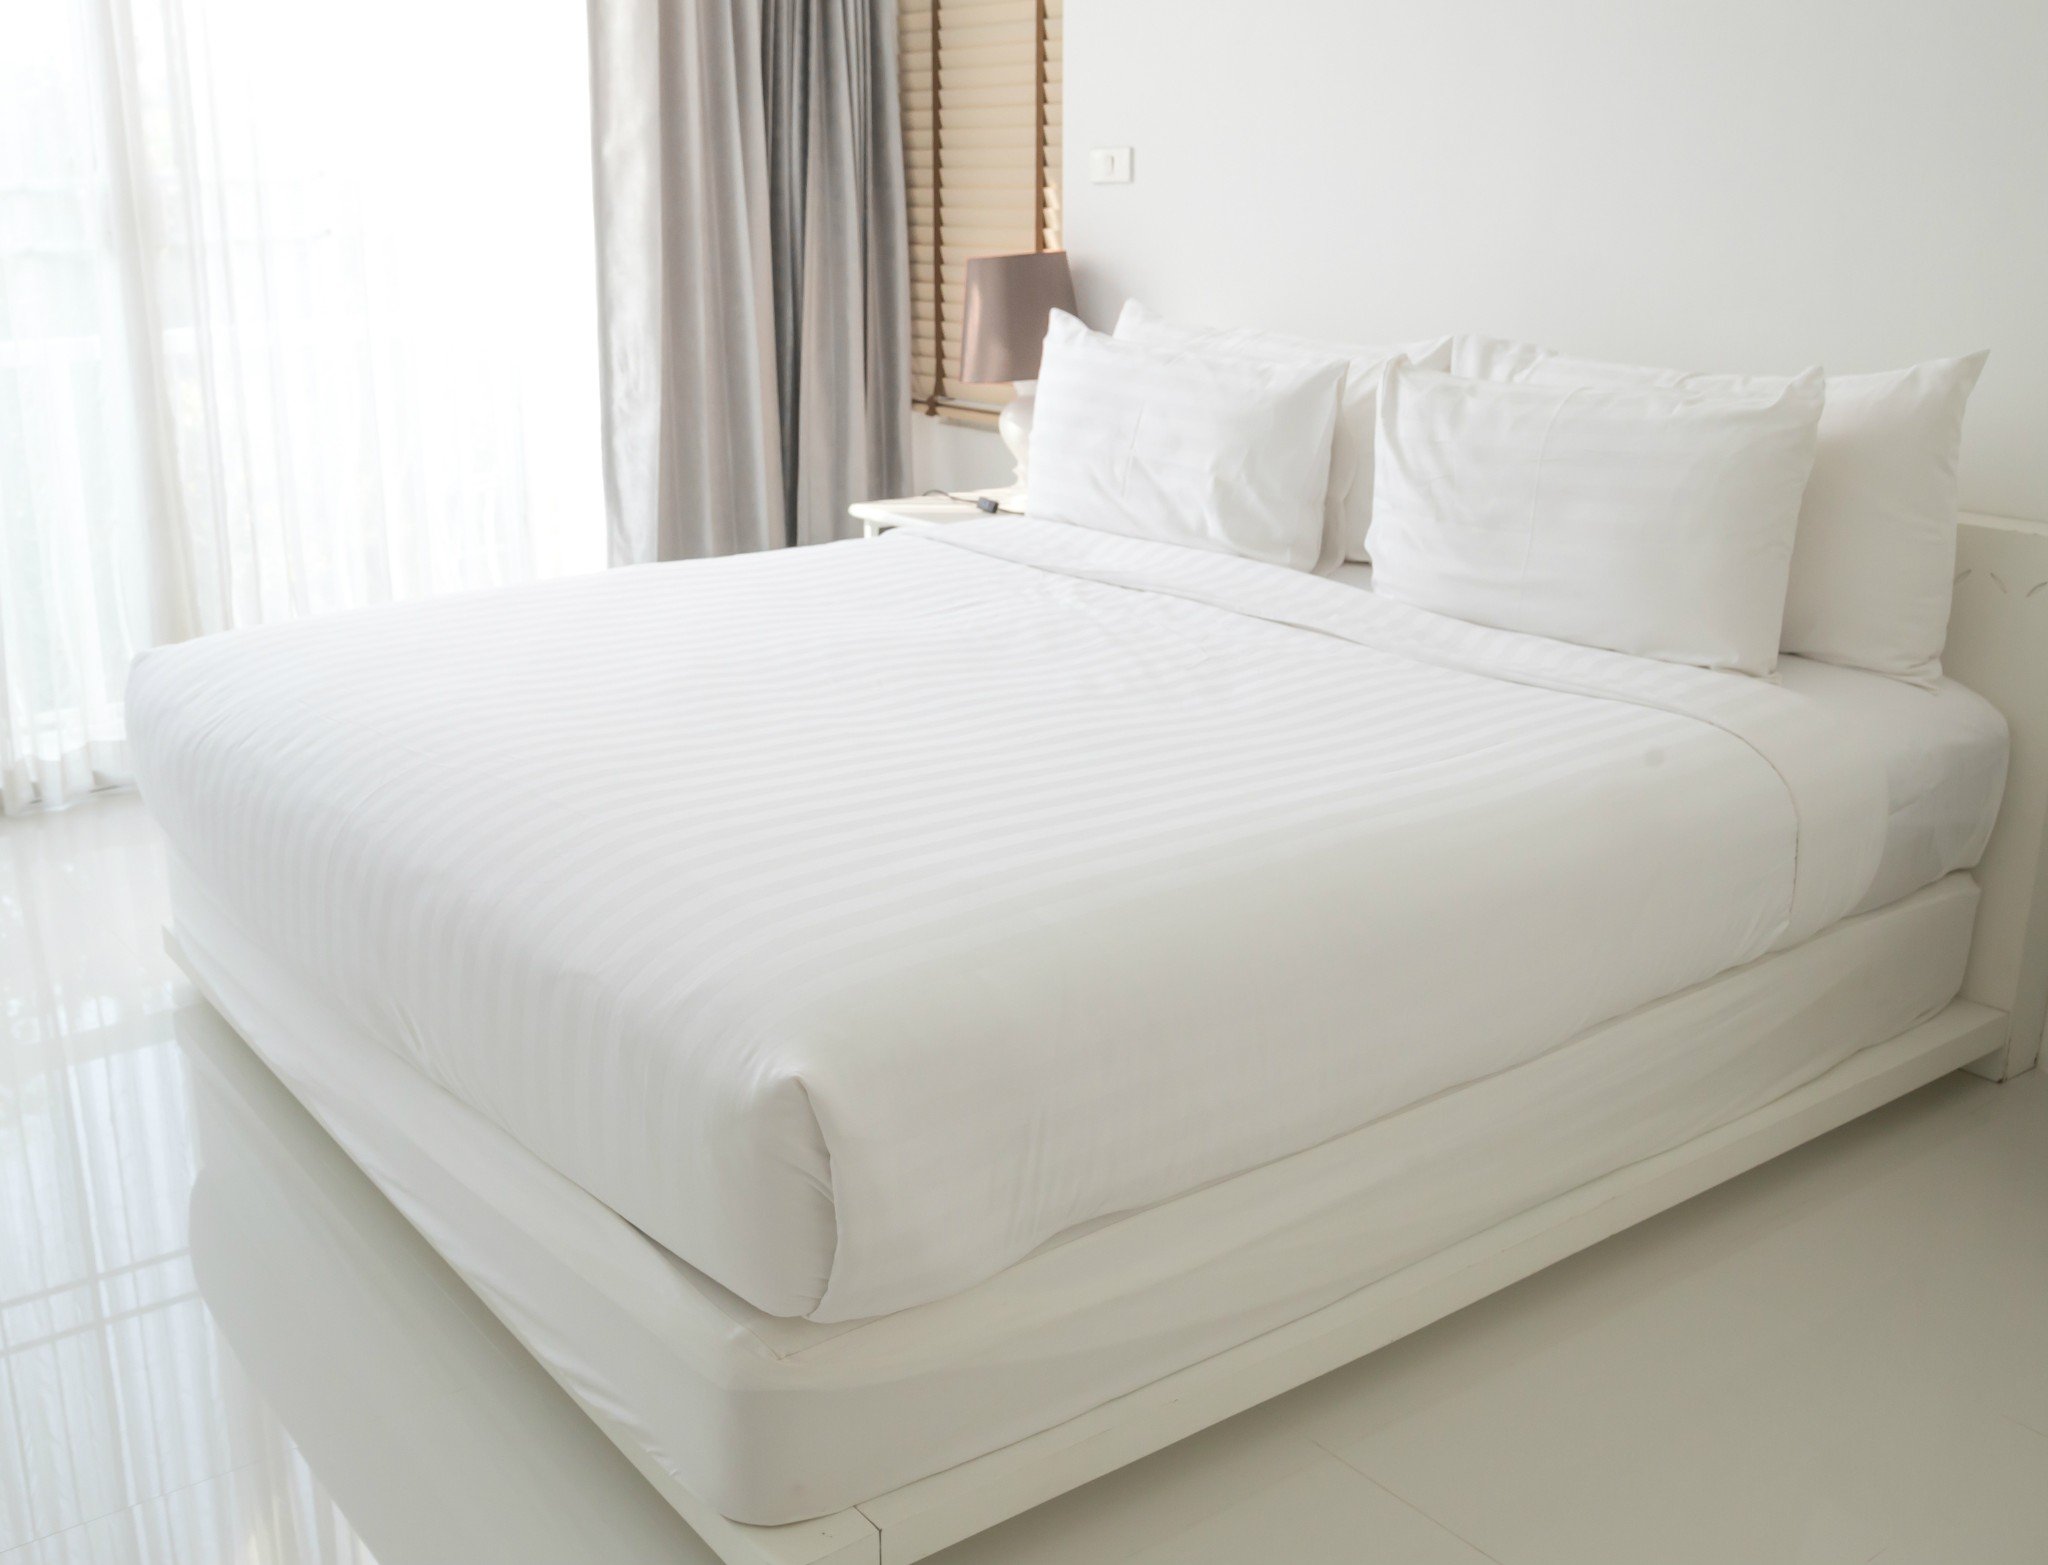 fitted bed sheet for thin mattress